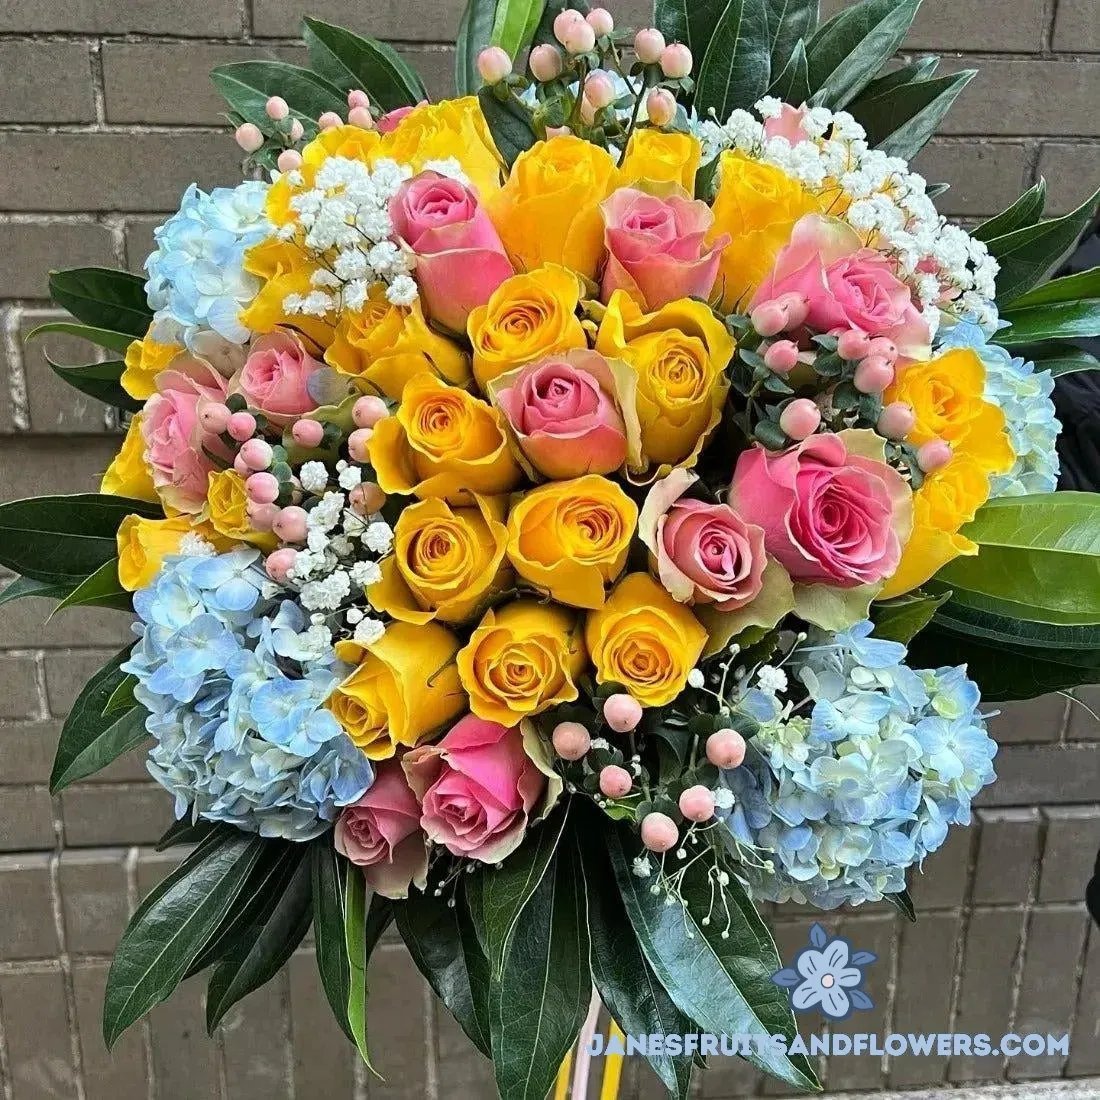 Big Apple Holidays Bouquet - Jane's Fruits And Flowers